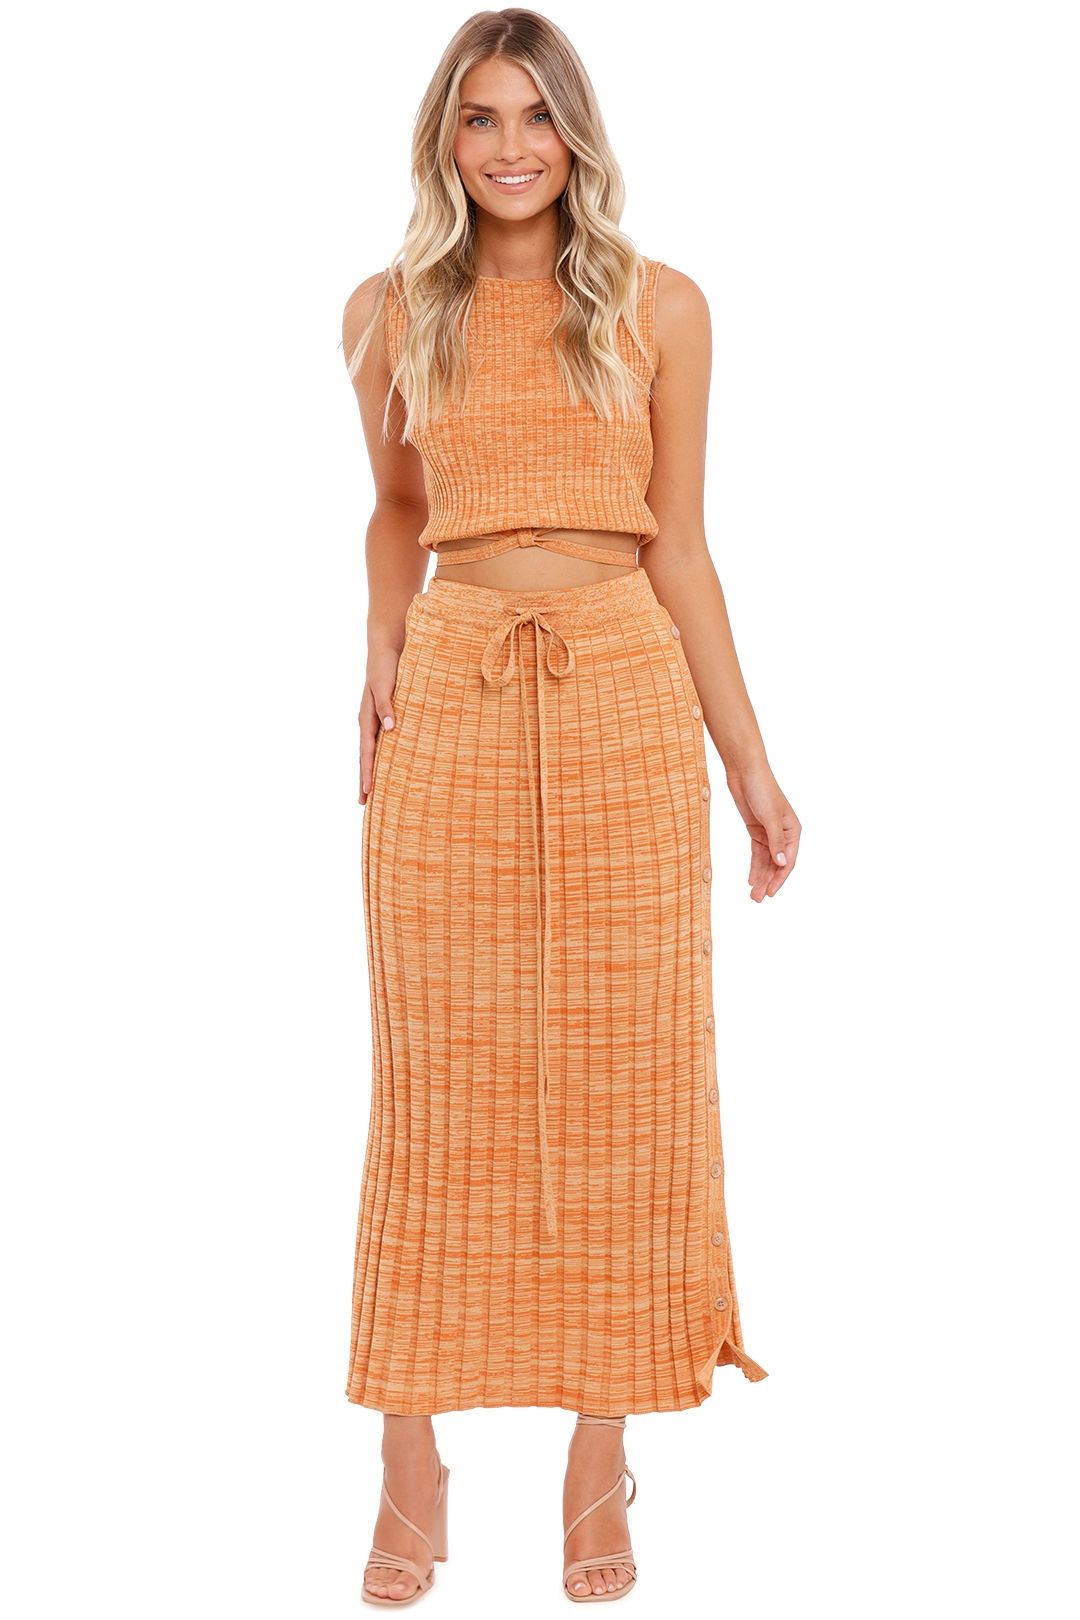 Ministry of Style Retrospective Knit Top and Skirt Faded Citrus midi